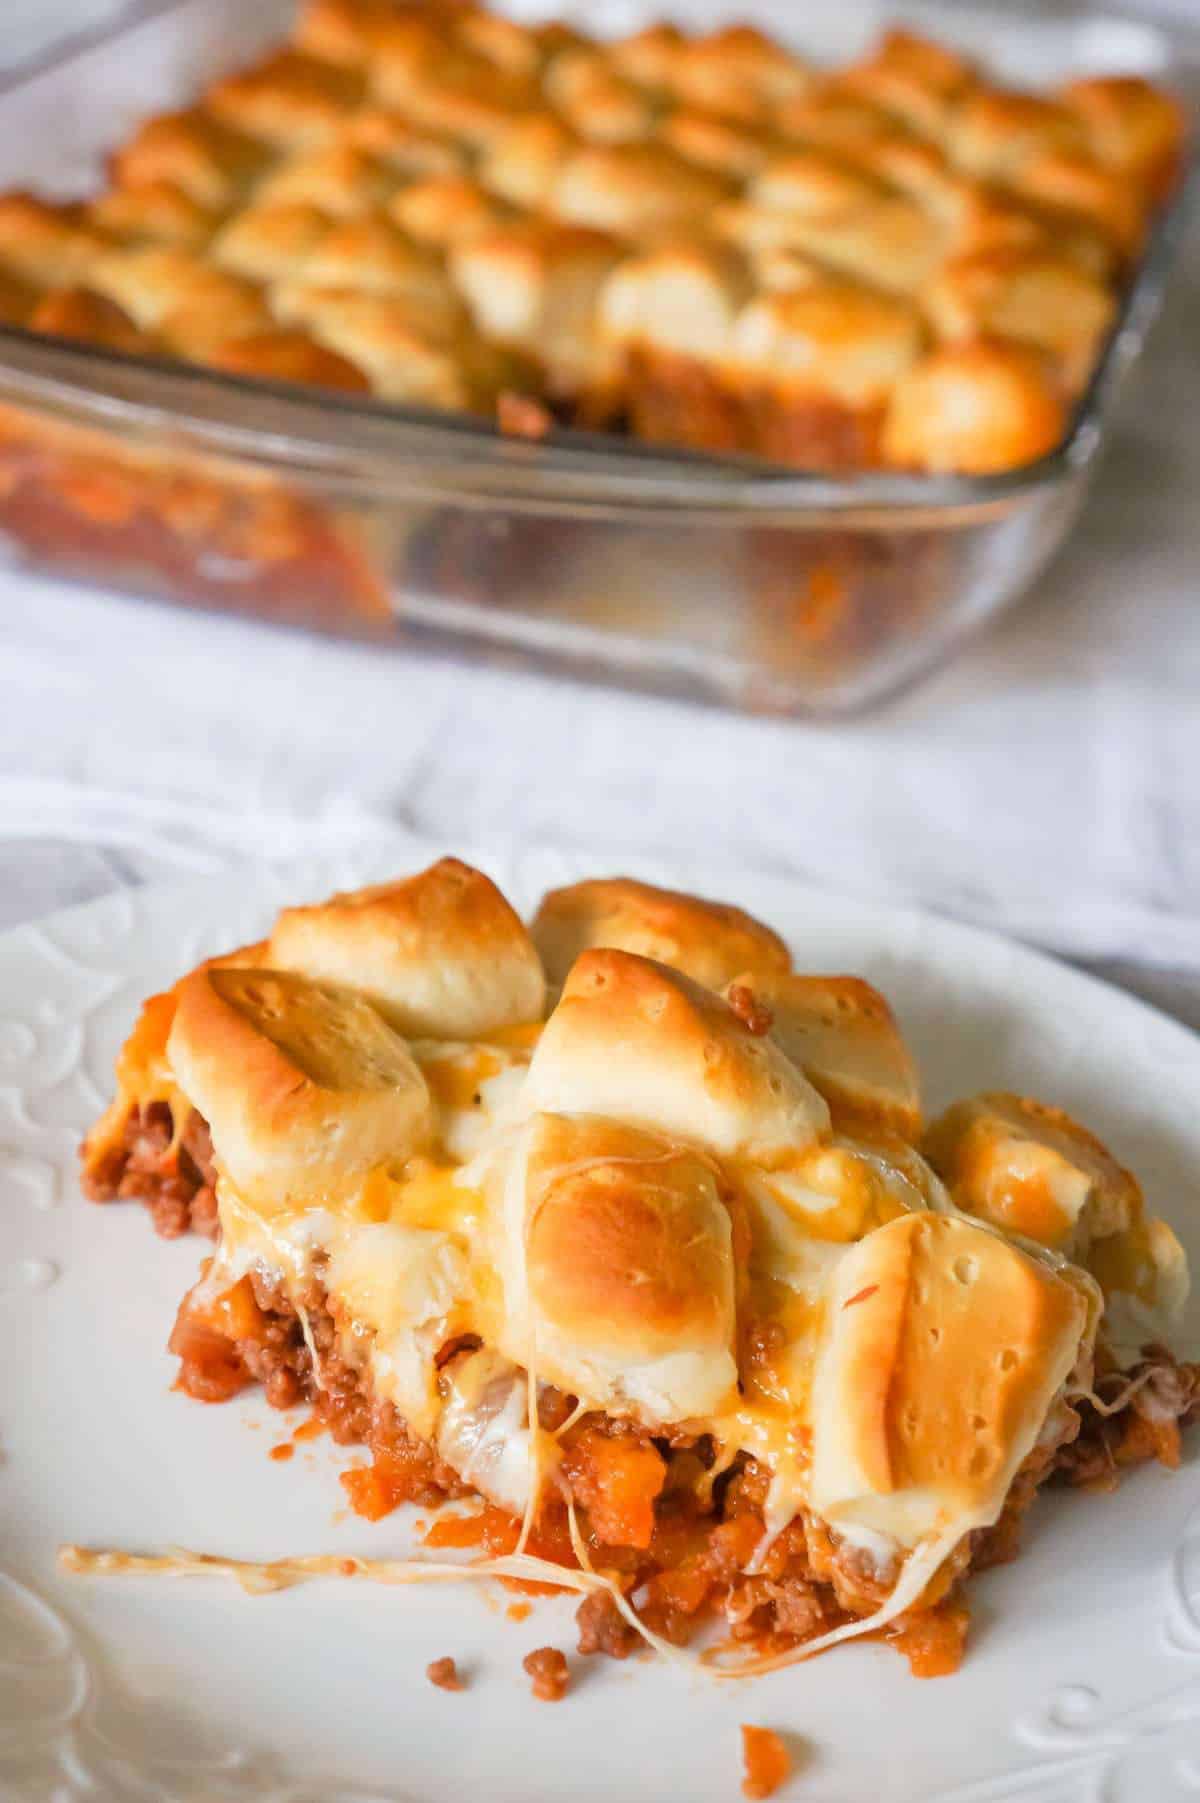 Sloppy Joe Biscuit Casserole is an easy ground beef casserole recipe loaded with French's fried onions, shredded mozzarella, cheddar and topped with Pillsbury biscuit pieces.